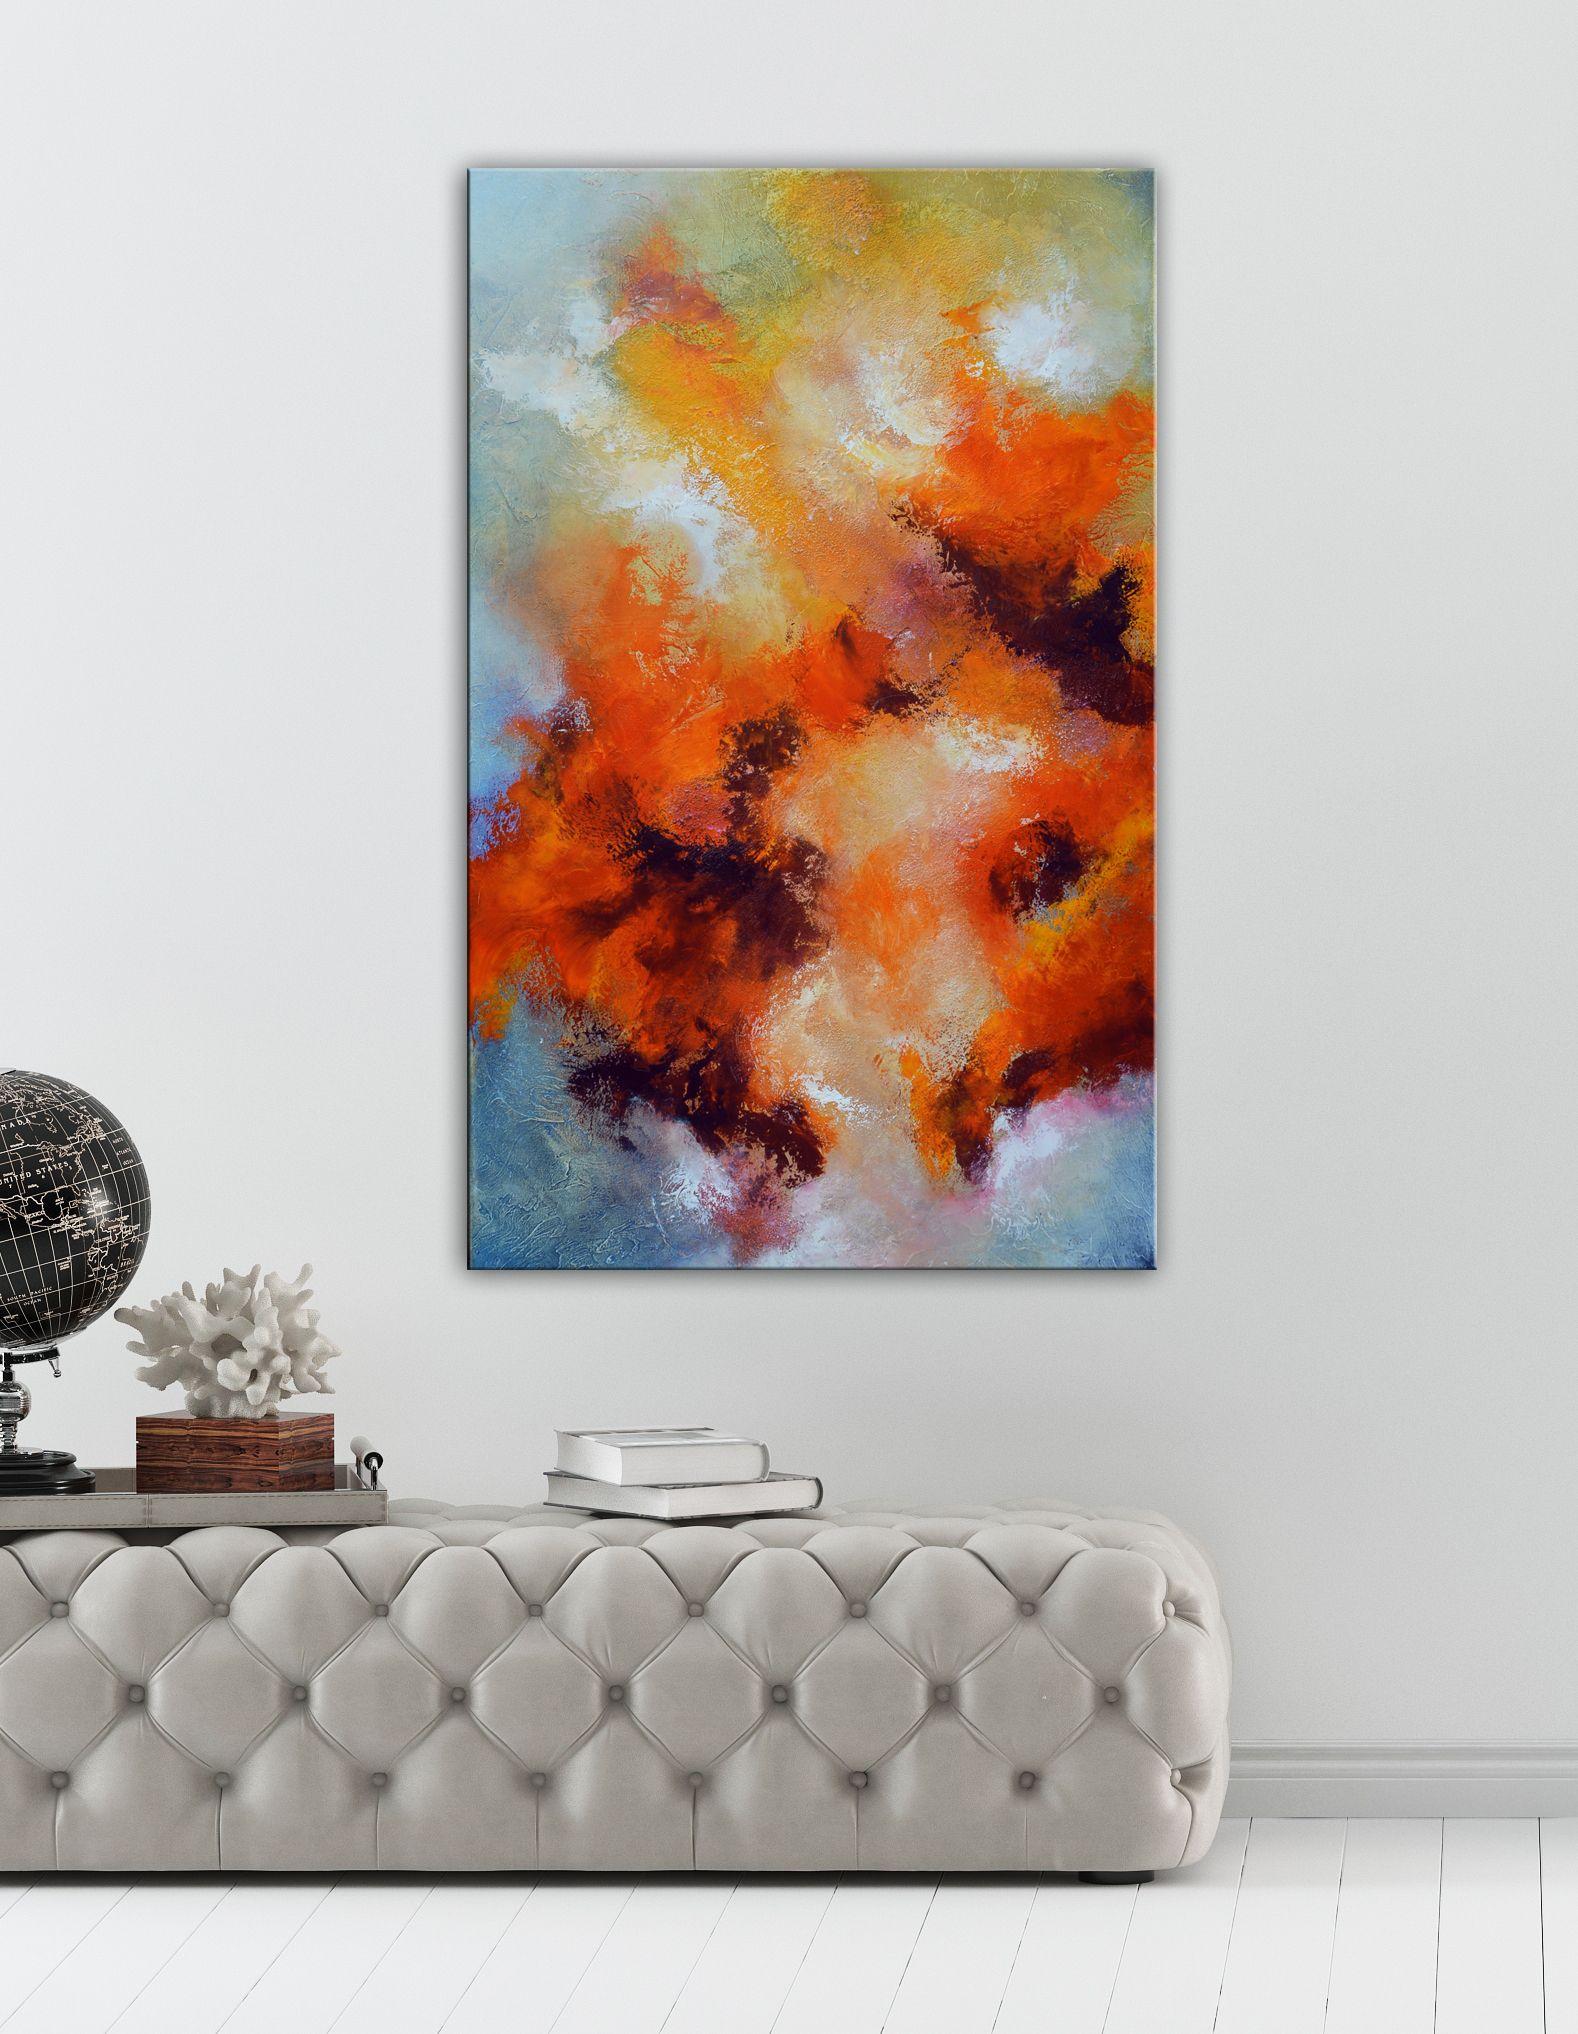 Bold beautiful colors and texture with blues, yellow, orange and red.  - Title: Autumn Poem  - Medium: Mixed media  - Support: canvas, ready to hang  - Size: 30